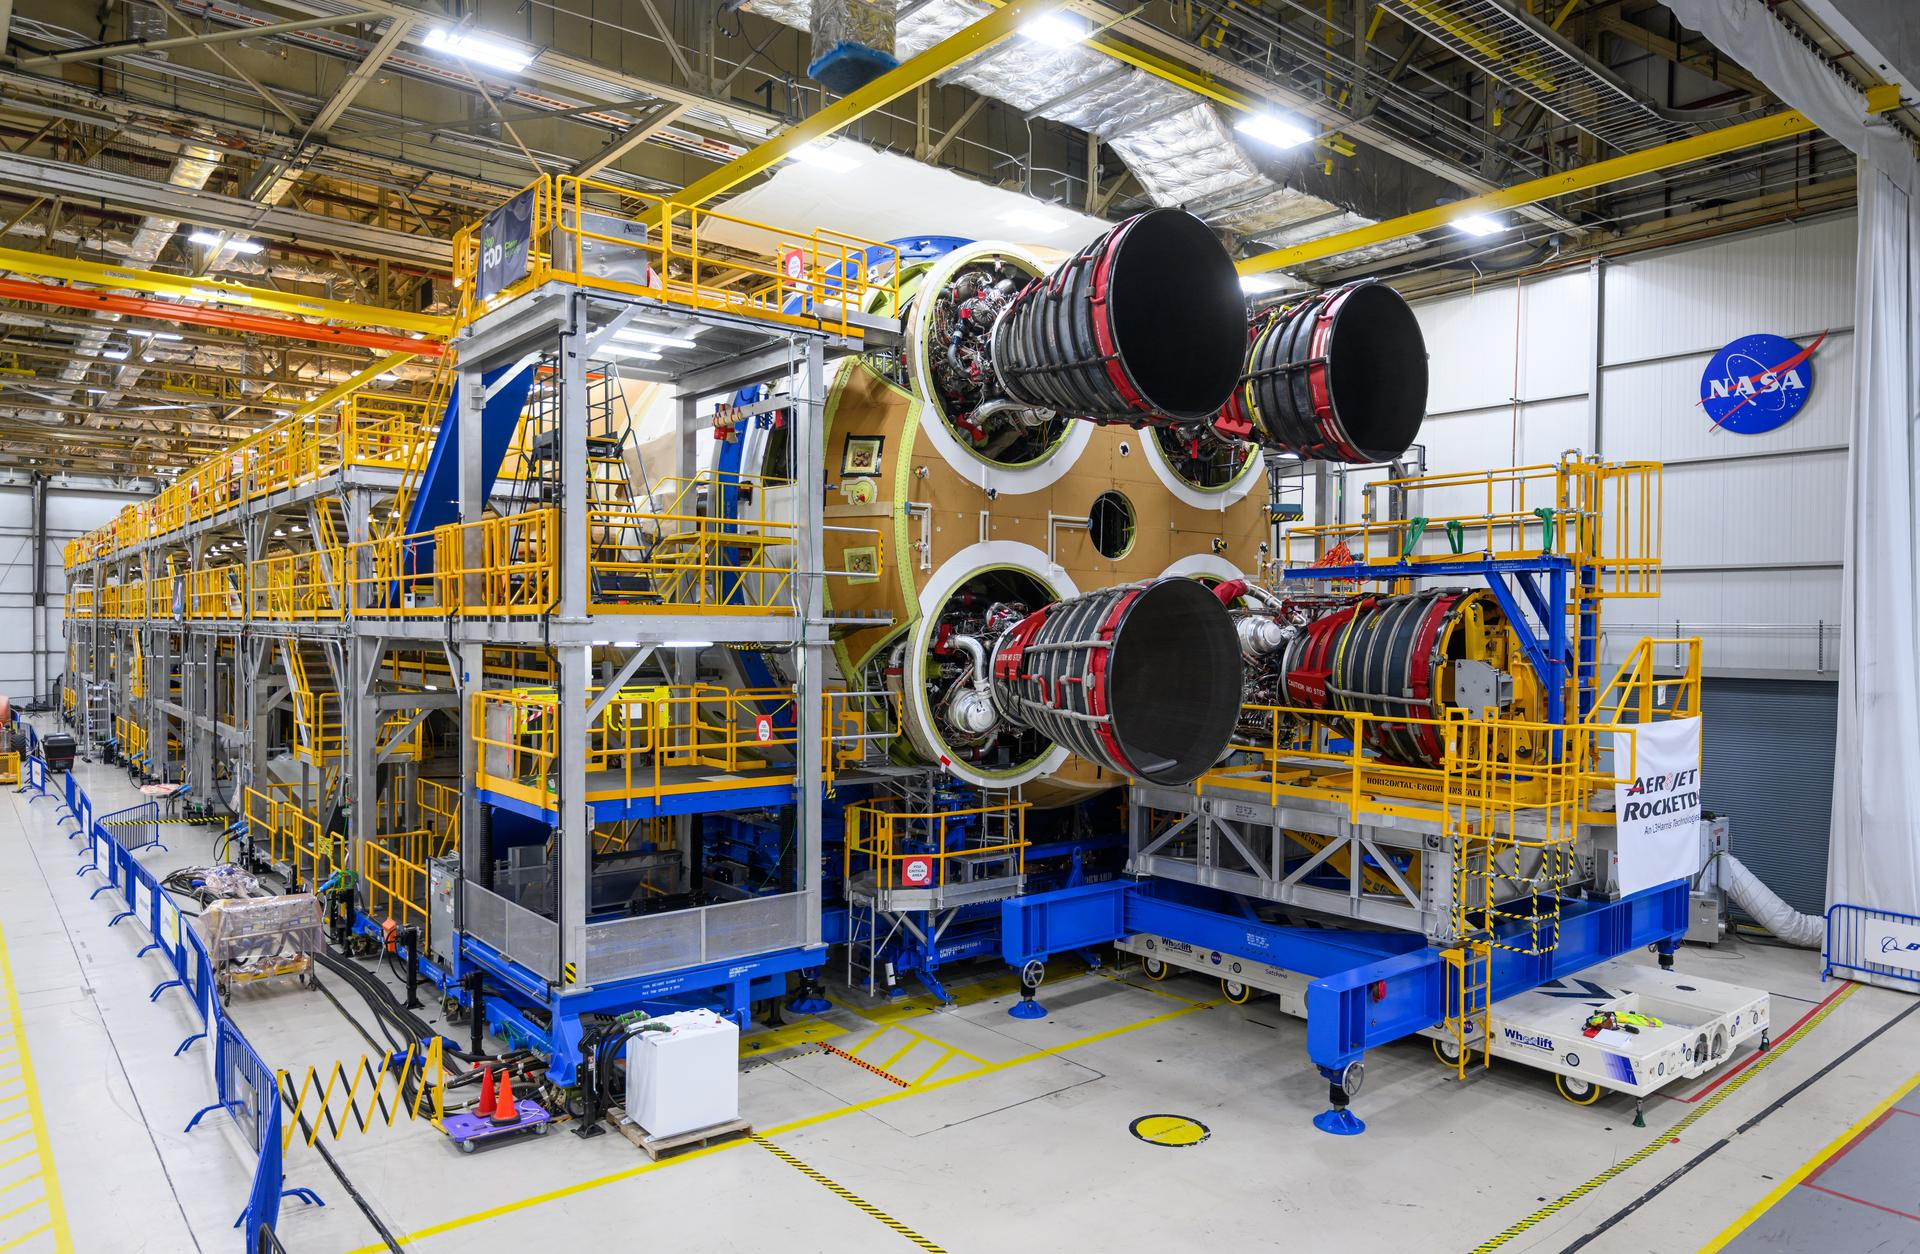 This photo shows how technicians at NASA’s Michoud Assembly Facility in New Orleans install the RS-25 engines onto the core stage for the agency’s SLS (Space Launch System) rocket that will help power NASA’s first crewed Artemis mission to the Moon.